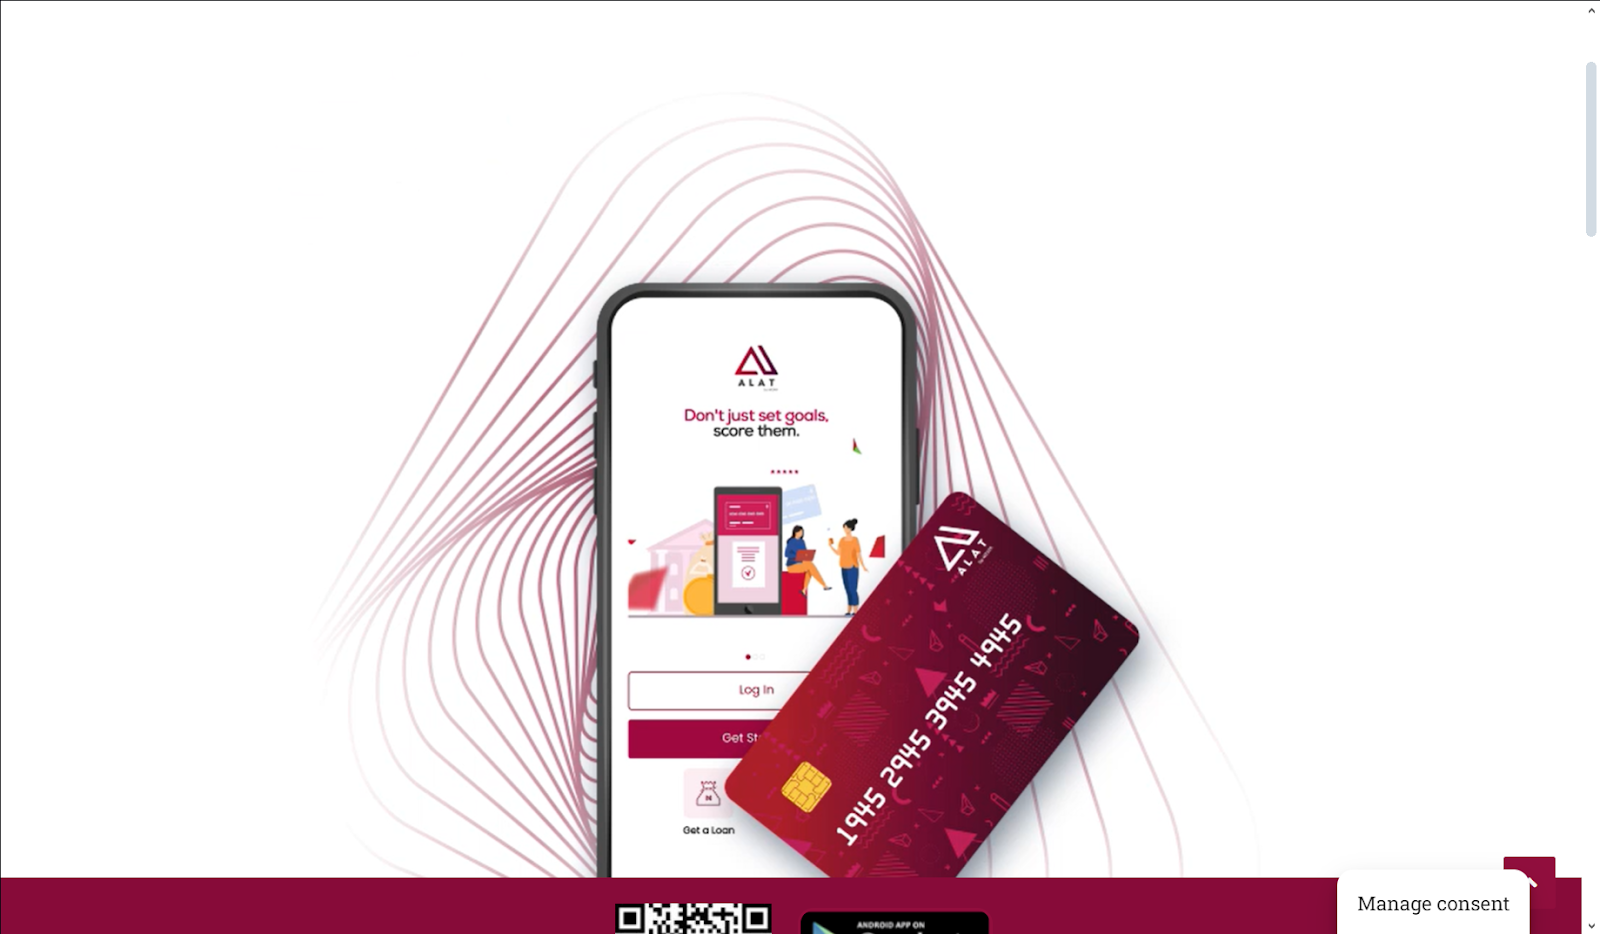 ALAT by Wema - One of the Top Virtual Dollar Cards in Nigeria